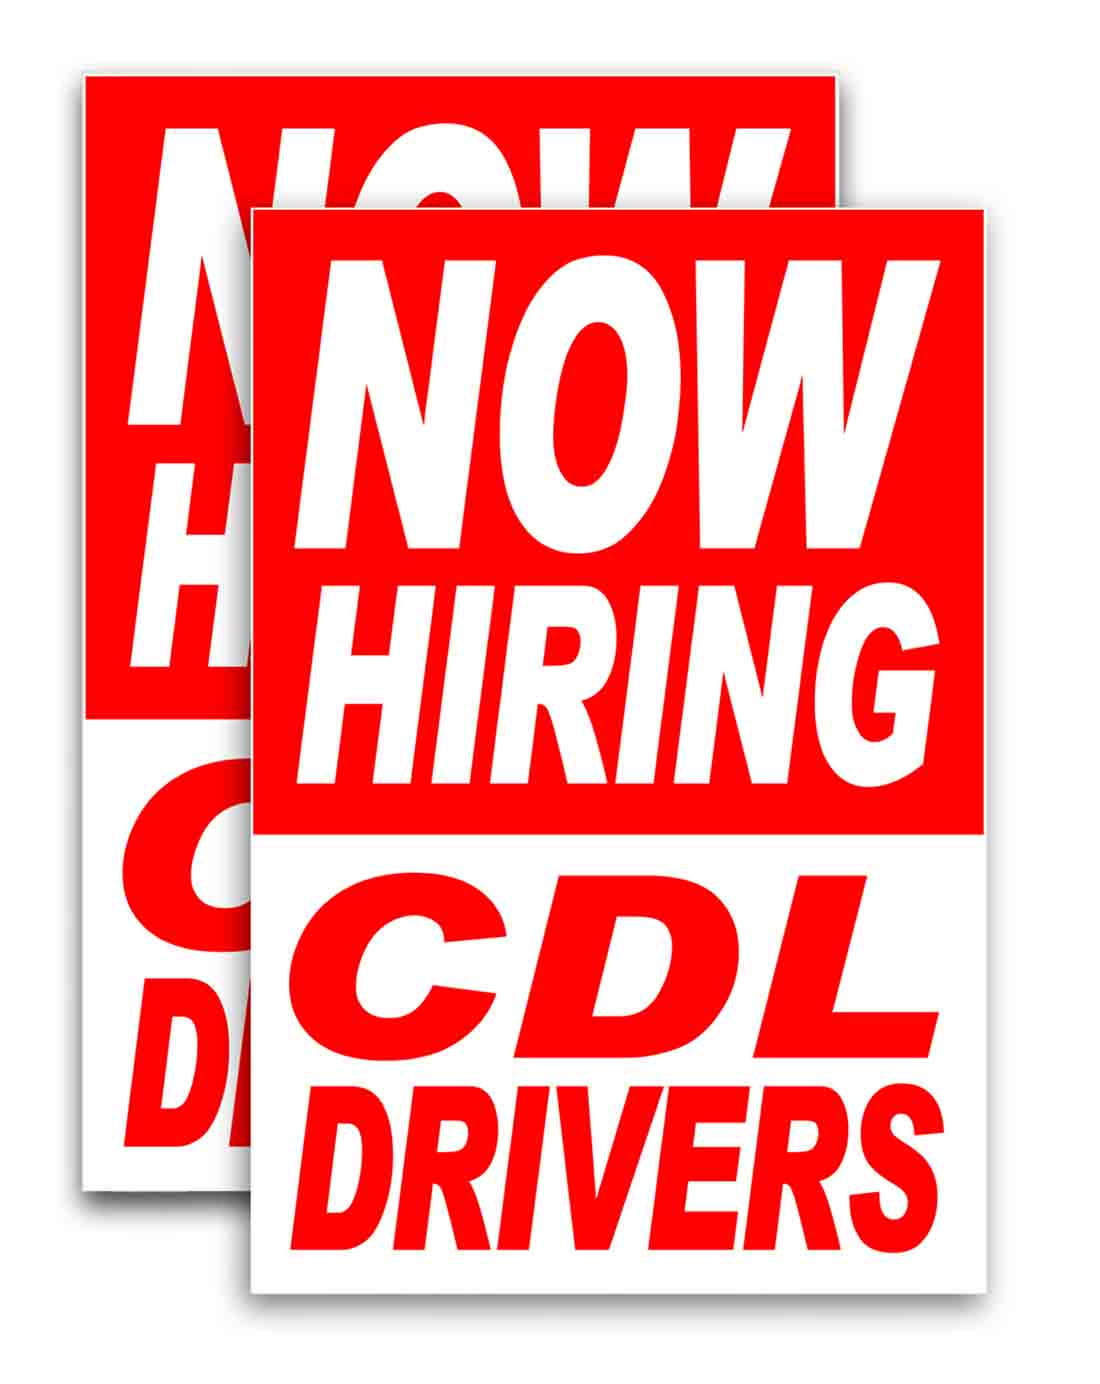 Driver Hiring File System for Commercial Drivers Employment $49.95 5 Pack 